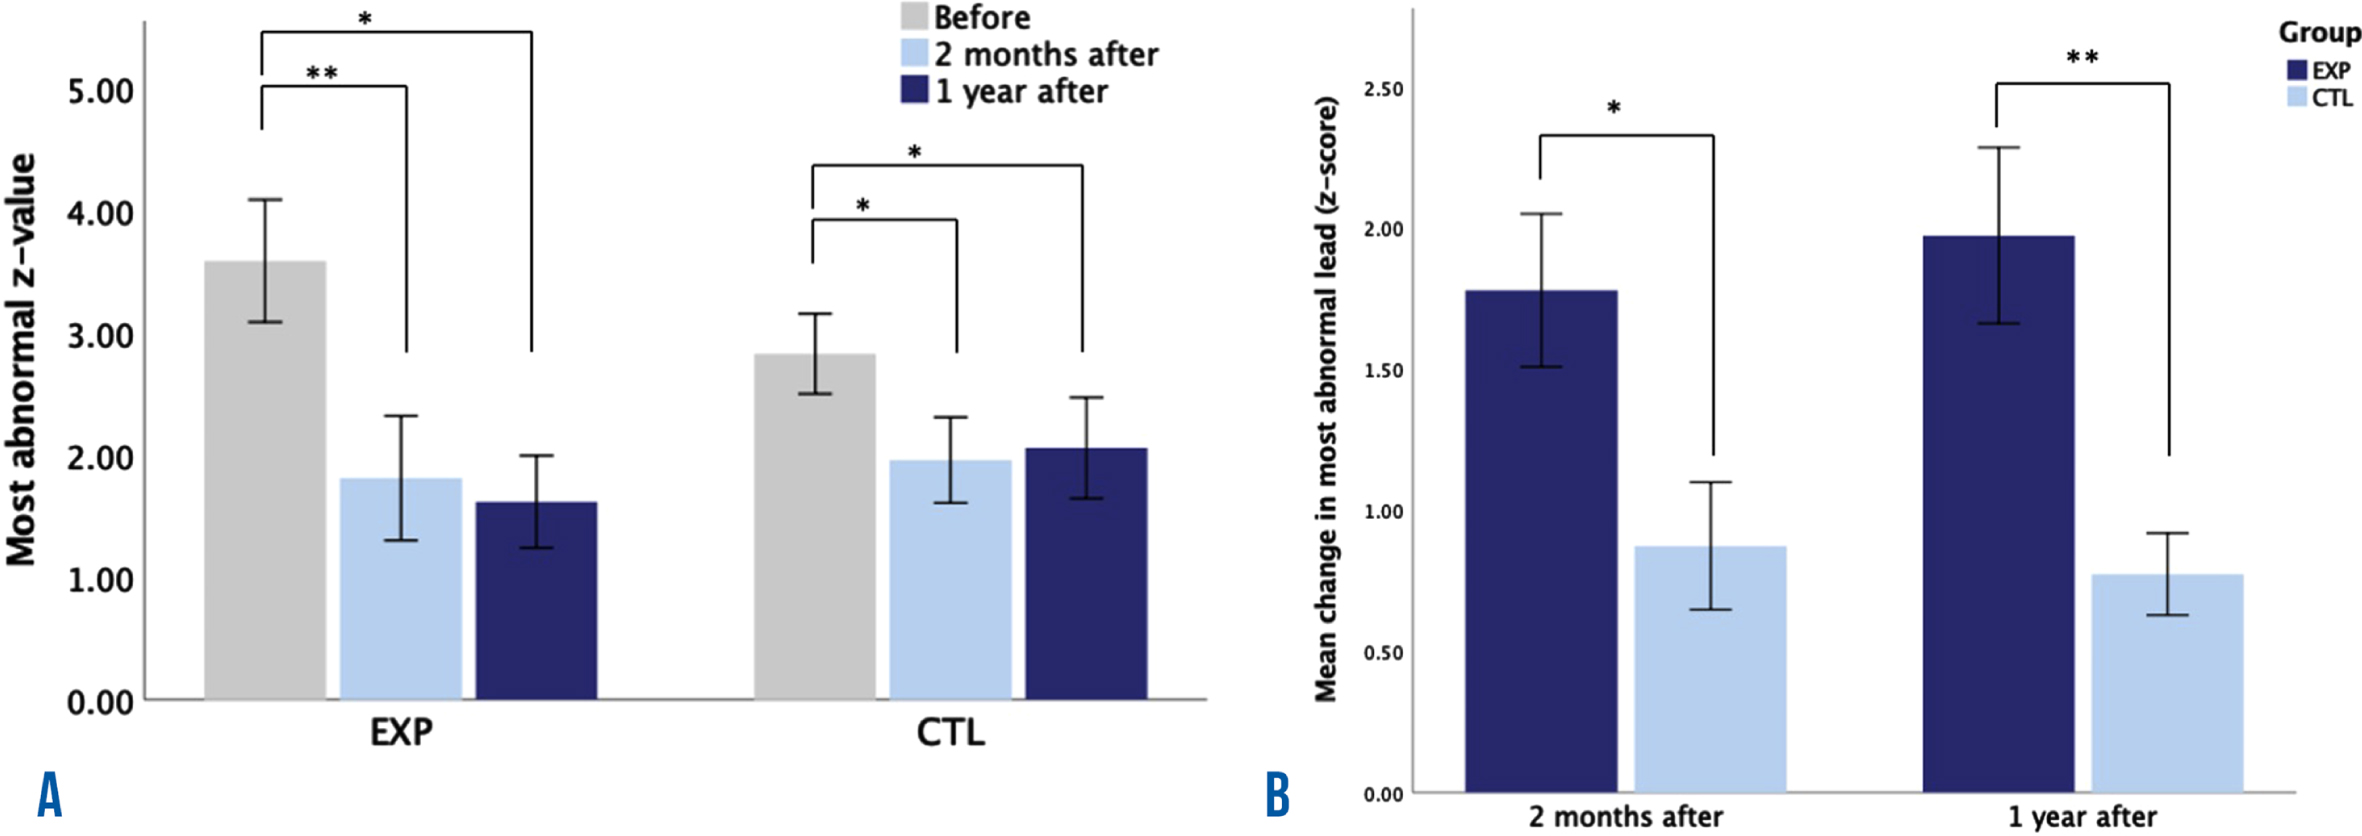 Learning induced by neurofeedback treatment. A) The mean value of the most abnormal z-values of theta absolute power (with the geometric power correction) at three time points: before, 2 months after and 1 year after treatment, for the experimental group (EXP) and the control group (CTL). B) Differences between groups in the mean change of the most abnormal z-values of theta absolute power at 2 months after and 1 year after treatment. *p < 0.05 and **p < 0.01 after correcting for pairwise comparisons.